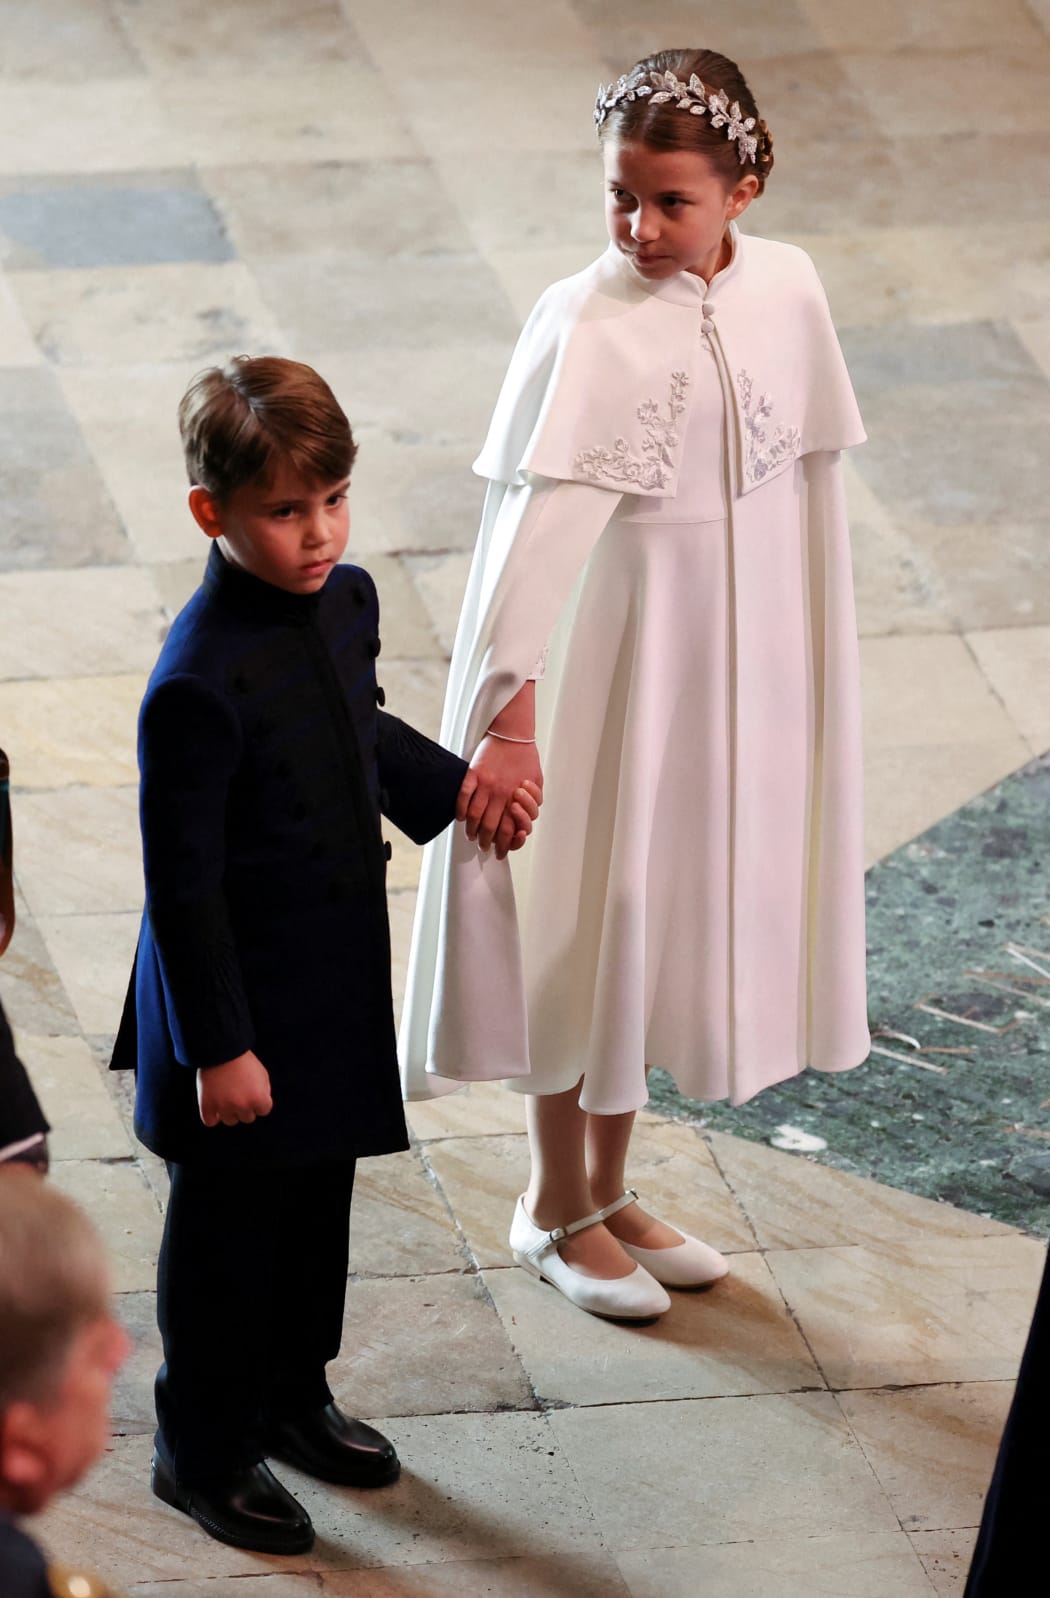 Britain's Princess Charlotte of Wales and Britain's Prince Louis of Wales arrive at Westminster Abbey in central London on May 6, 2023, ahead of the coronations of Britain's King Charles III and Britain's Camilla, Queen Consort. - The set-piece coronation is the first in Britain in 70 years, and only the second in history to be televised. Charles will be the 40th reigning monarch to be crowned at the central London church since King William I in 1066. Outside the UK, he is also king of 14 other Commonwealth countries, including Australia, Canada and New Zealand. Camilla, his second wife, will be crowned queen alongside him, and be known as Queen Camilla after the ceremony. (Photo by PHIL NOBLE / POOL / AFP)